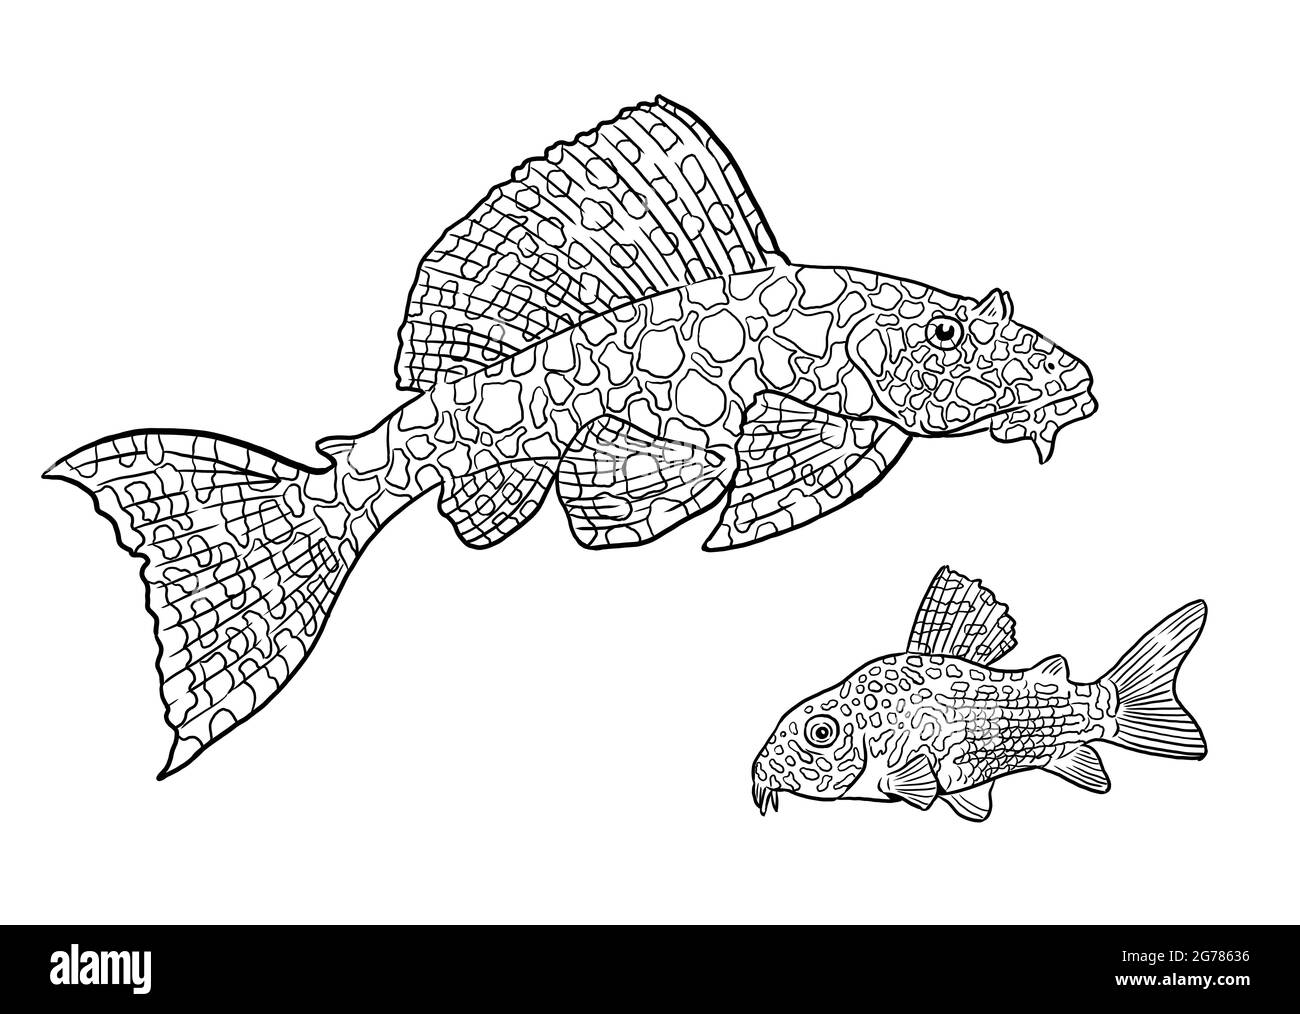 Aquarium with  ancistrus and catfish for coloring. Colorful fish templates. Coloring book for children and adults. Stock Photo